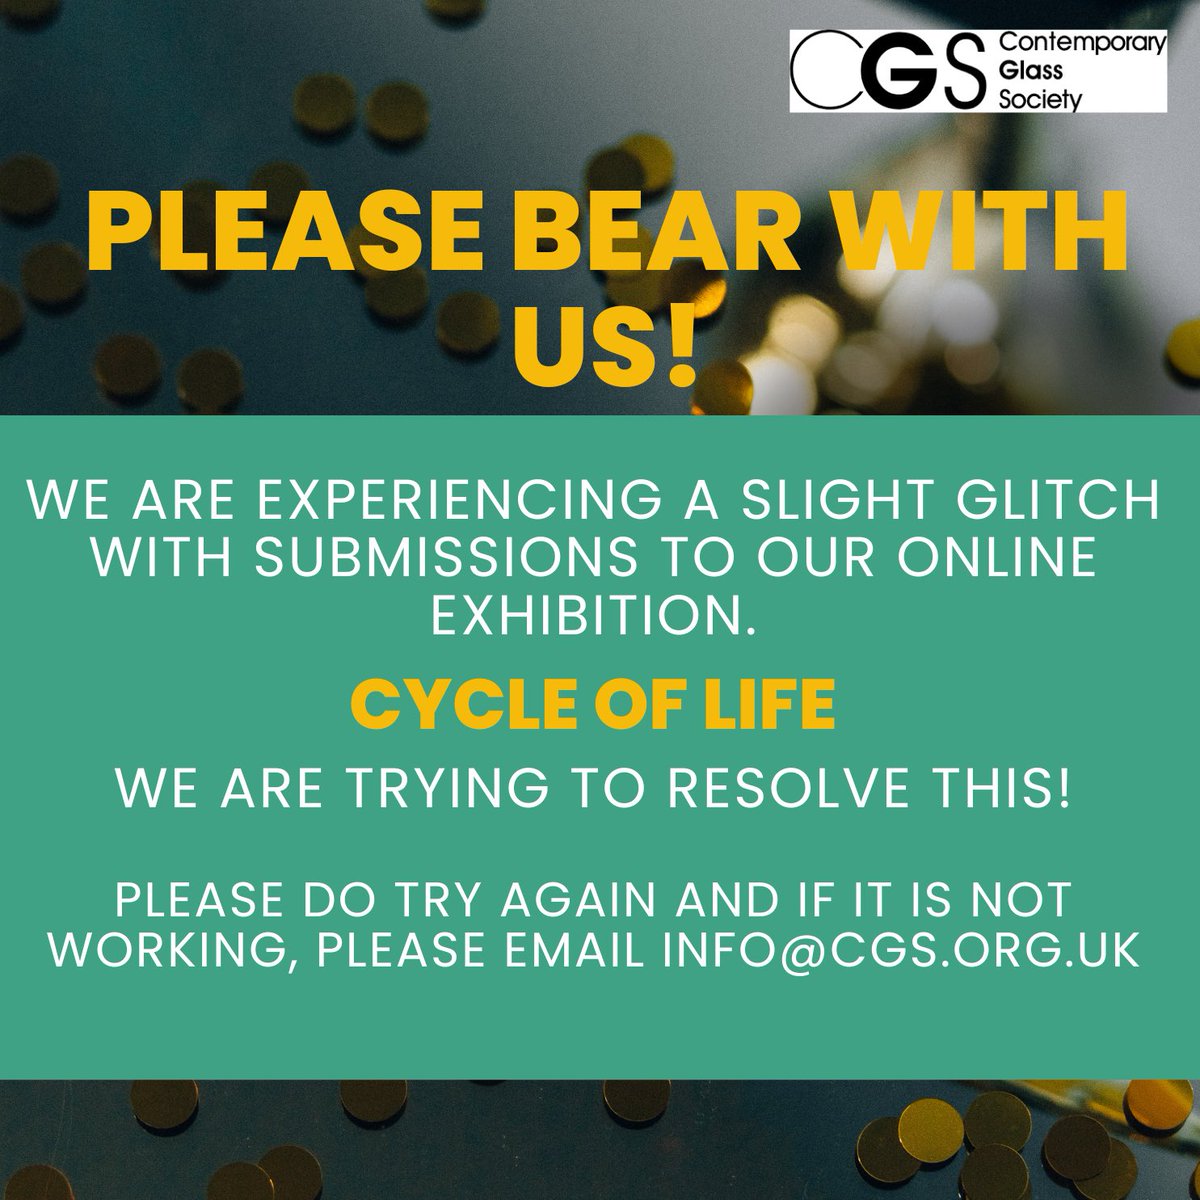 Please bear either us if you’re trying to submit an image to forthcoming online exhibition. Please do try again and if it still isn’t working, please email the email address below.